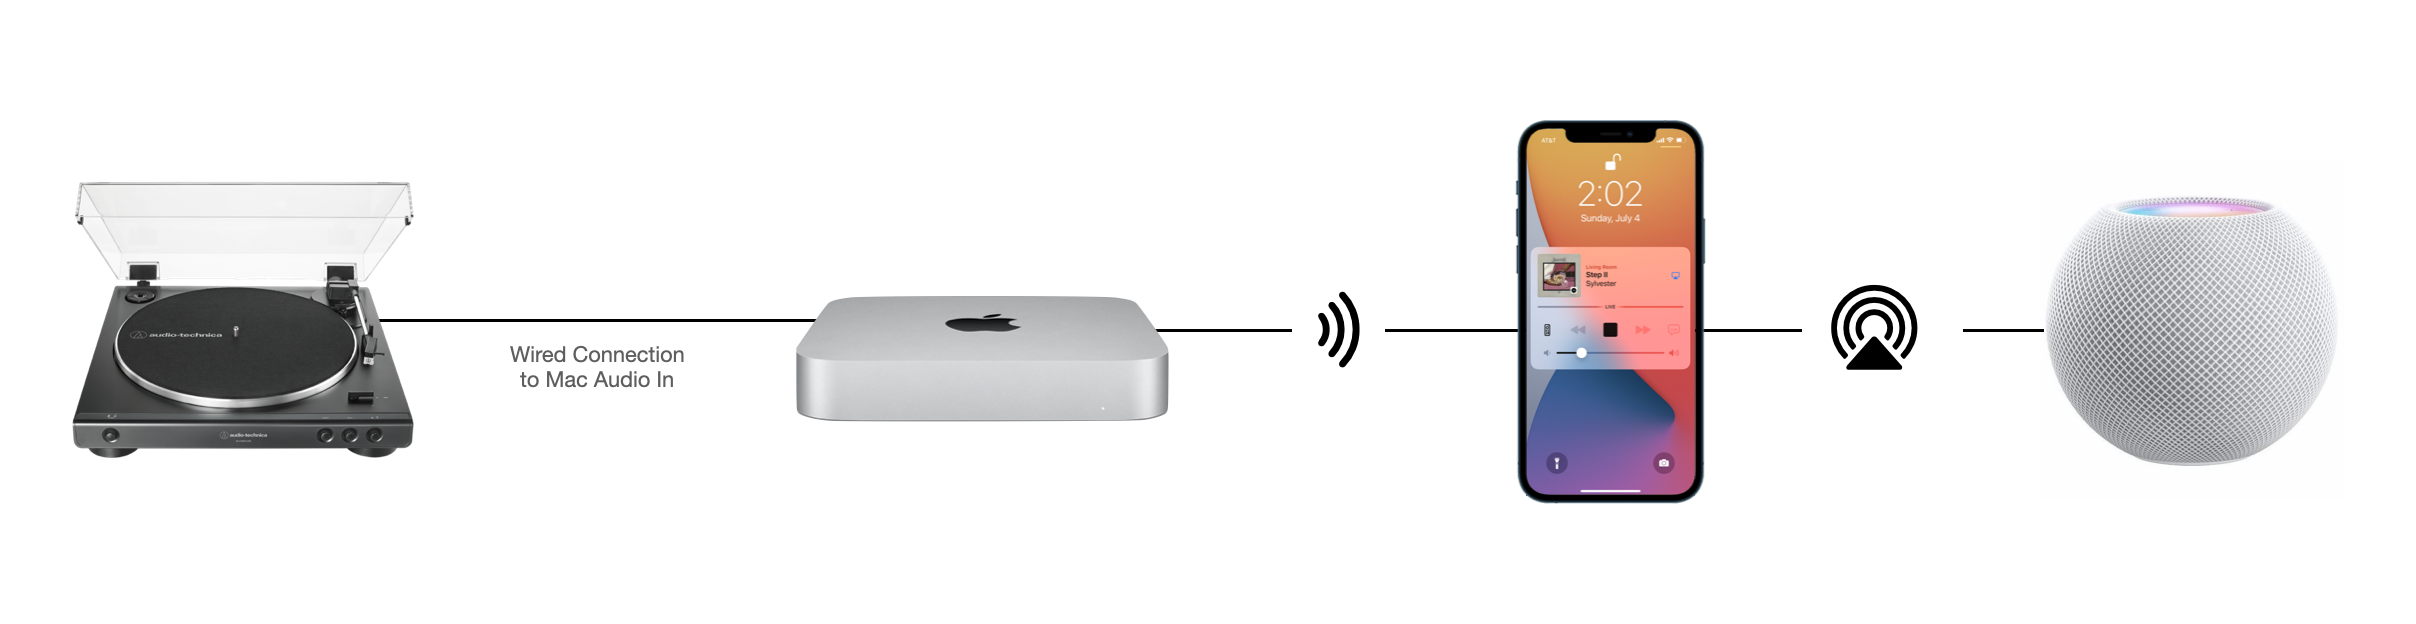 Diagram showing connection between audio source, Mac, and client